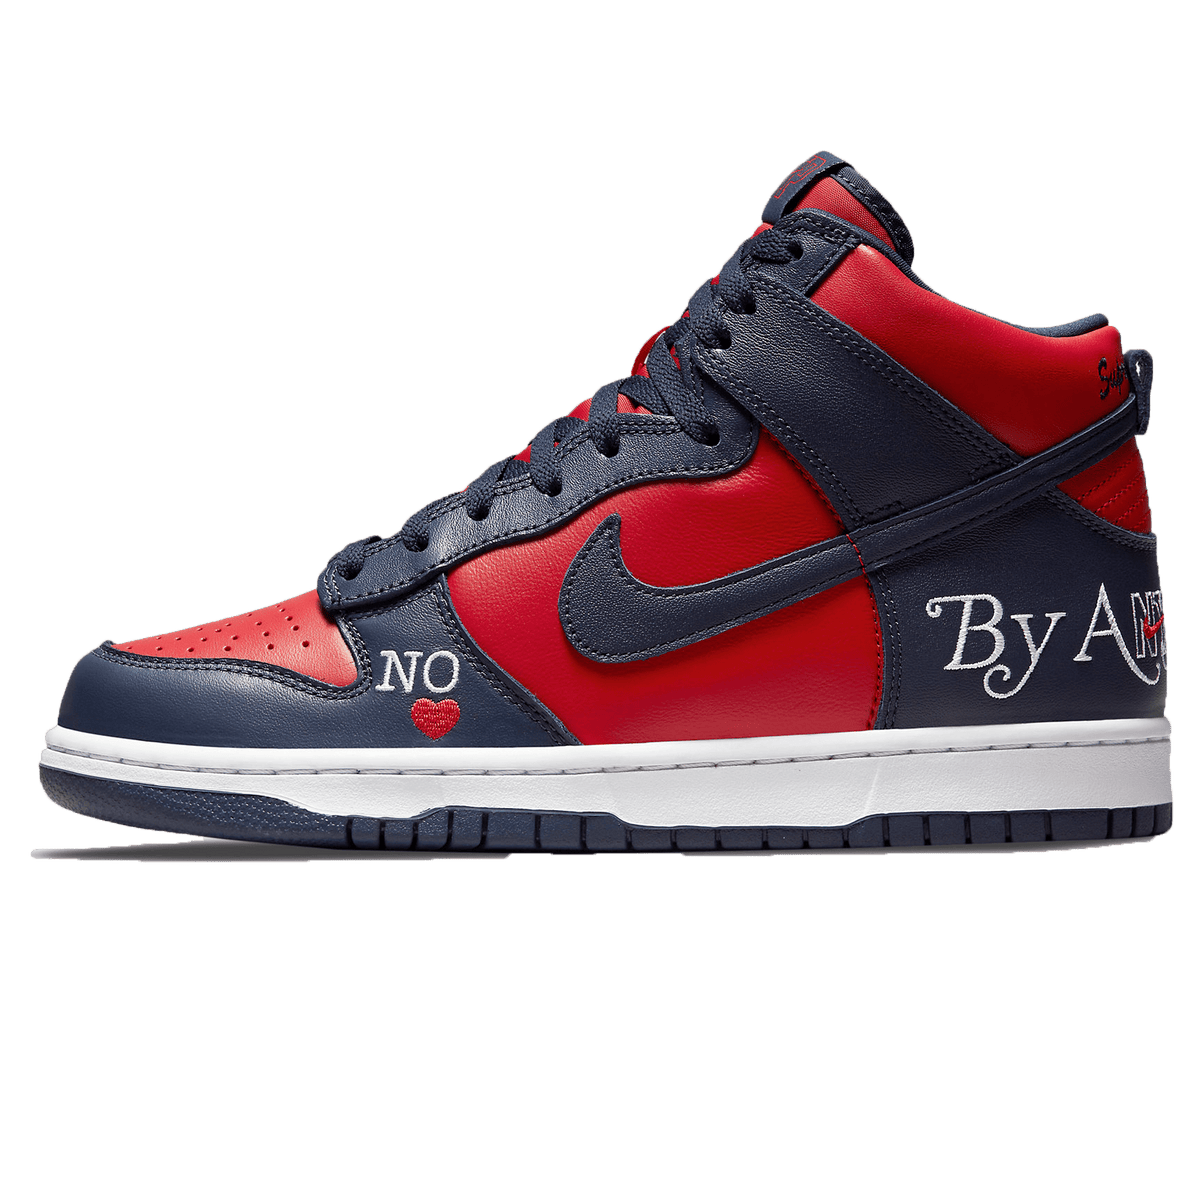 Supreme x Nike gravity Dunk High SB 'By Any Means - Red Navy' - UrlfreezeShops